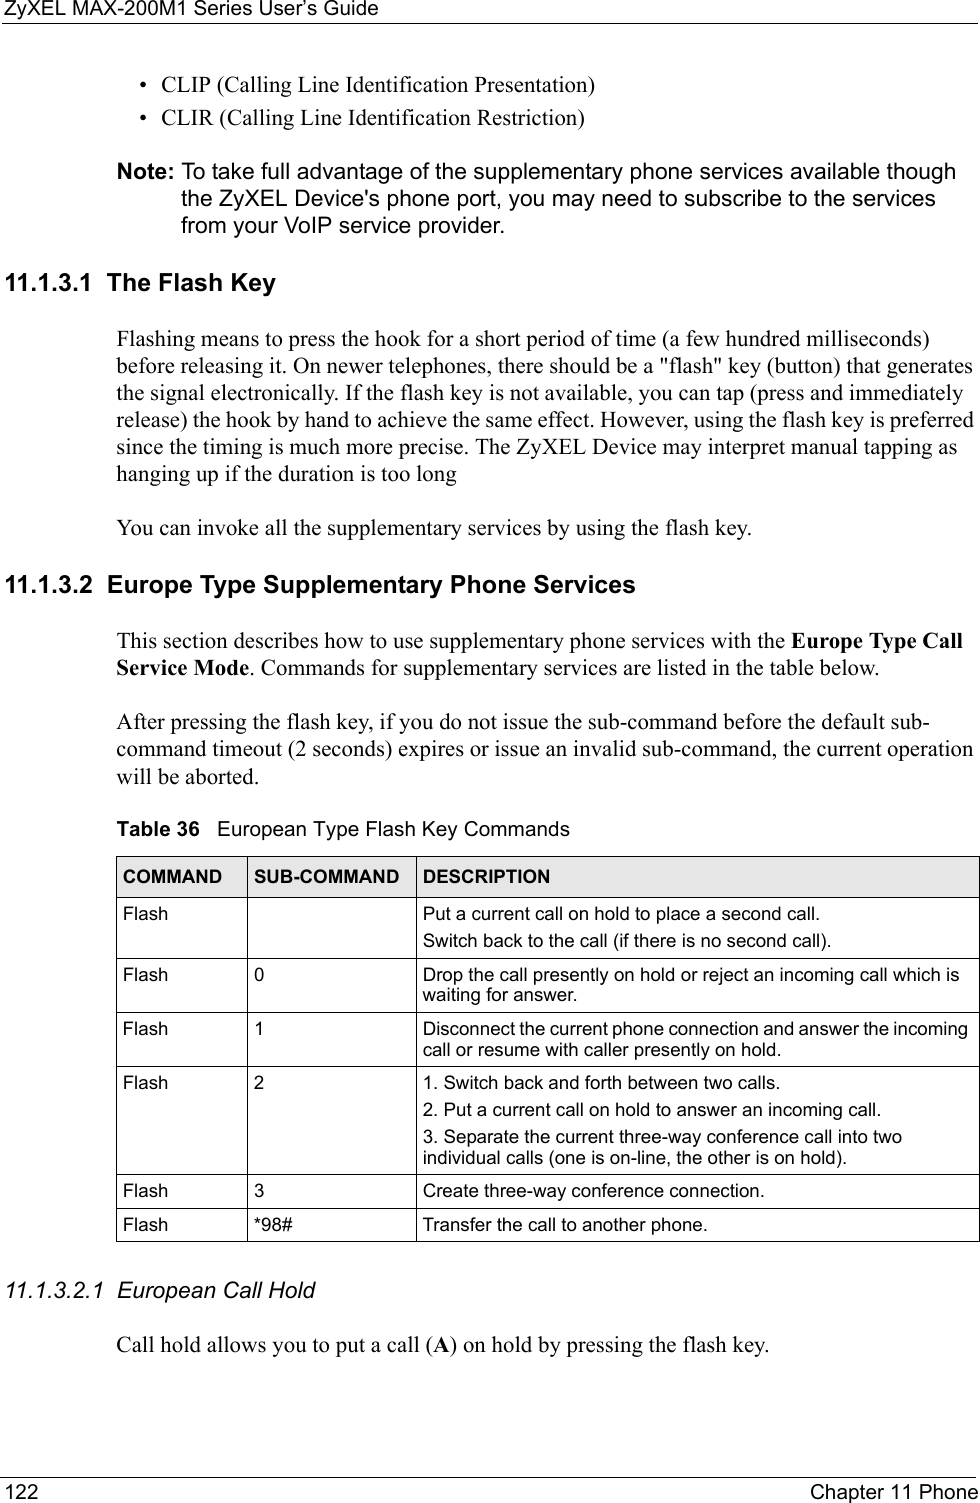 ZyXEL MAX-200M1 Series User’s Guide122 Chapter 11 Phone• CLIP (Calling Line Identification Presentation)• CLIR (Calling Line Identification Restriction)Note: To take full advantage of the supplementary phone services available though the ZyXEL Device&apos;s phone port, you may need to subscribe to the services from your VoIP service provider.11.1.3.1  The Flash KeyFlashing means to press the hook for a short period of time (a few hundred milliseconds) before releasing it. On newer telephones, there should be a &quot;flash&quot; key (button) that generates the signal electronically. If the flash key is not available, you can tap (press and immediately release) the hook by hand to achieve the same effect. However, using the flash key is preferred since the timing is much more precise. The ZyXEL Device may interpret manual tapping as hanging up if the duration is too longYou can invoke all the supplementary services by using the flash key. 11.1.3.2  Europe Type Supplementary Phone ServicesThis section describes how to use supplementary phone services with the Europe Type Call Service Mode. Commands for supplementary services are listed in the table below.After pressing the flash key, if you do not issue the sub-command before the default sub-command timeout (2 seconds) expires or issue an invalid sub-command, the current operation will be aborted.11.1.3.2.1  European Call HoldCall hold allows you to put a call (A) on hold by pressing the flash key. Table 36   European Type Flash Key CommandsCOMMAND SUB-COMMAND DESCRIPTIONFlash  Put a current call on hold to place a second call.Switch back to the call (if there is no second call).Flash 0 Drop the call presently on hold or reject an incoming call which is waiting for answer.Flash 1 Disconnect the current phone connection and answer the incoming call or resume with caller presently on hold.Flash 2 1. Switch back and forth between two calls.2. Put a current call on hold to answer an incoming call.3. Separate the current three-way conference call into two individual calls (one is on-line, the other is on hold).Flash 3 Create three-way conference connection.Flash  *98# Transfer the call to another phone.